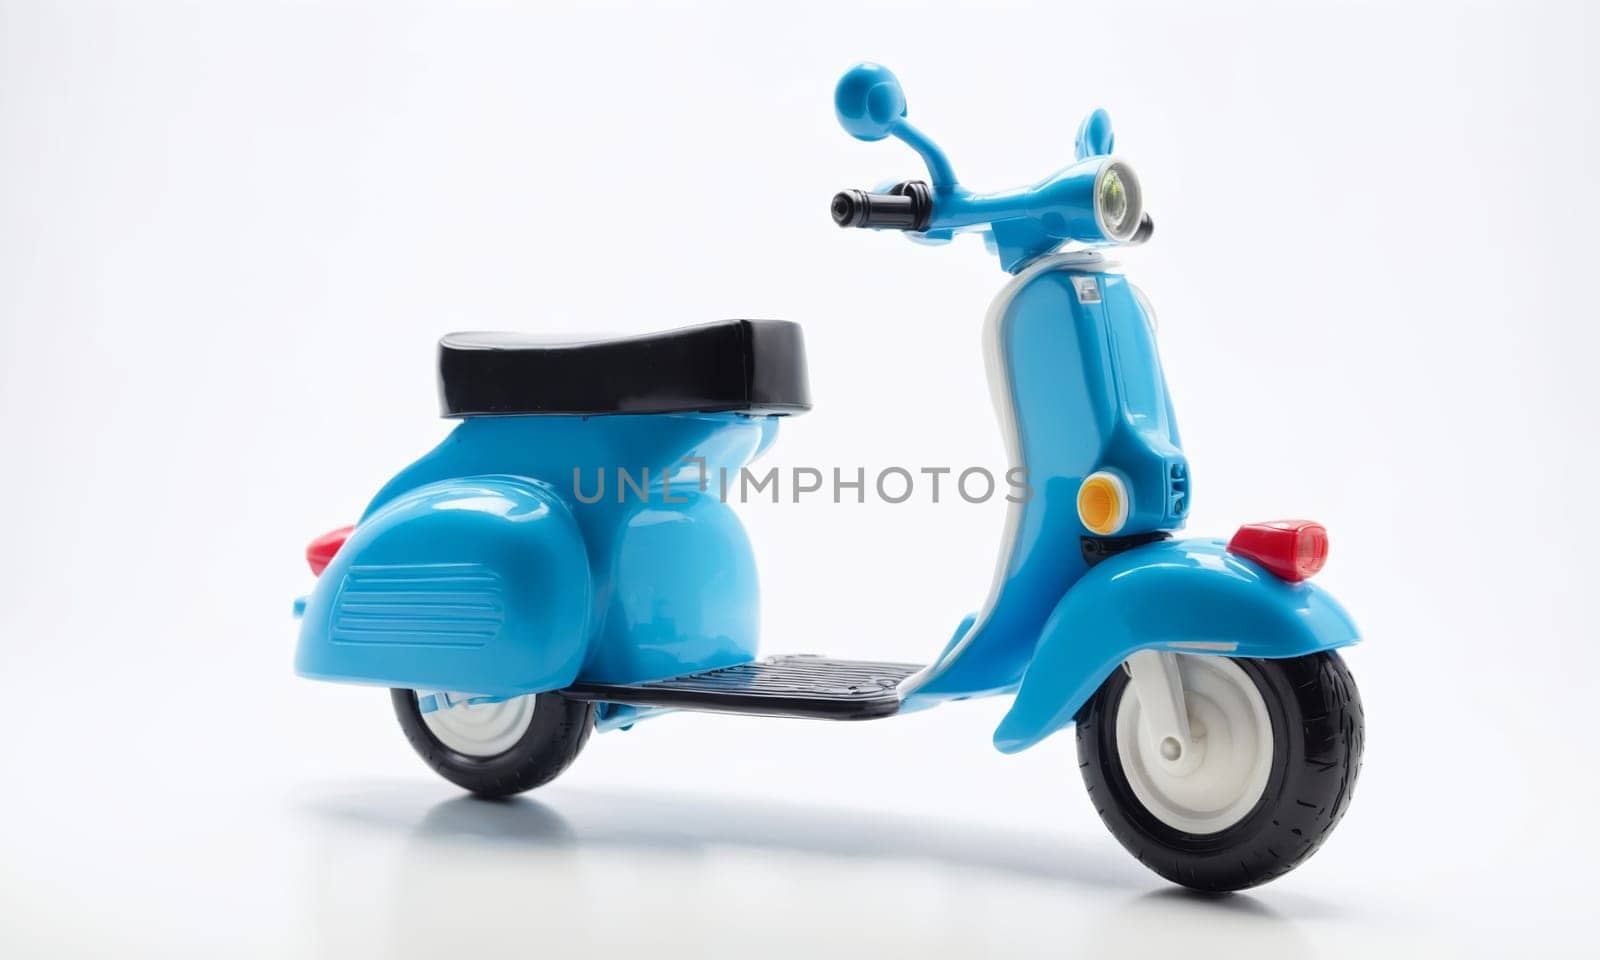 Classic blue scooter isolated on white background. 3d rendering